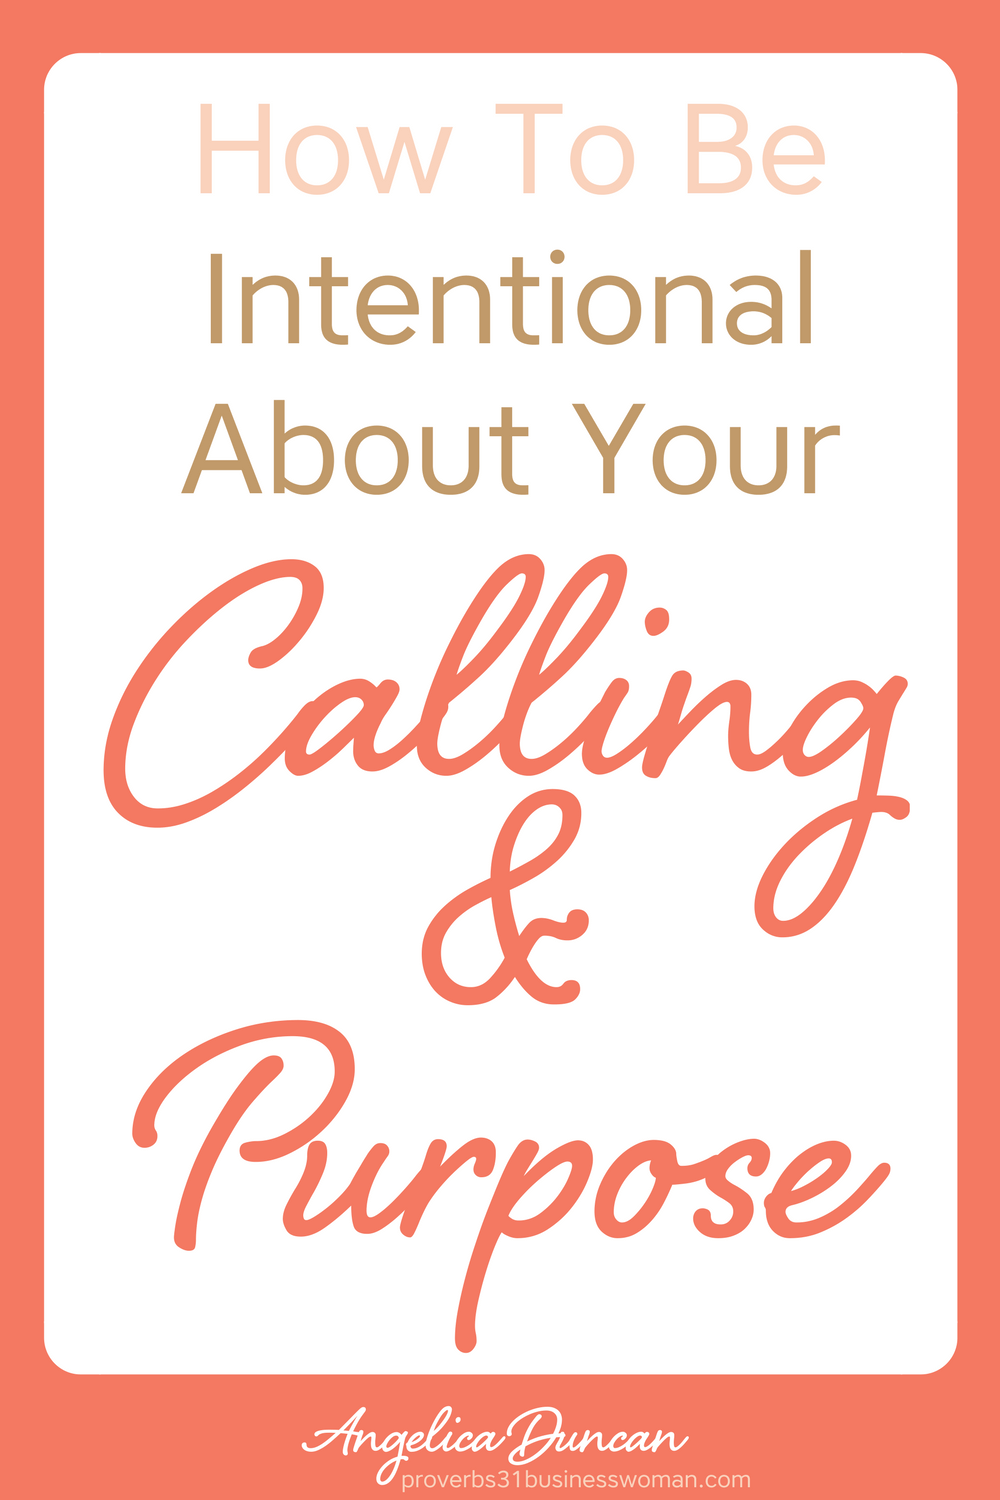 God wants you to be intentional about pursuing your calling and purpose in life! Let me show 5 simple, yet powerful action-steps to make it happen! #calling #purpose #christianwomenleaders #womenleaders #faith #chrisitanblogger #proverbs31woman #proverbs31businesswoman #proverbs31enrepreneur #p31 #silkoversteel #sos #angelicaduncan